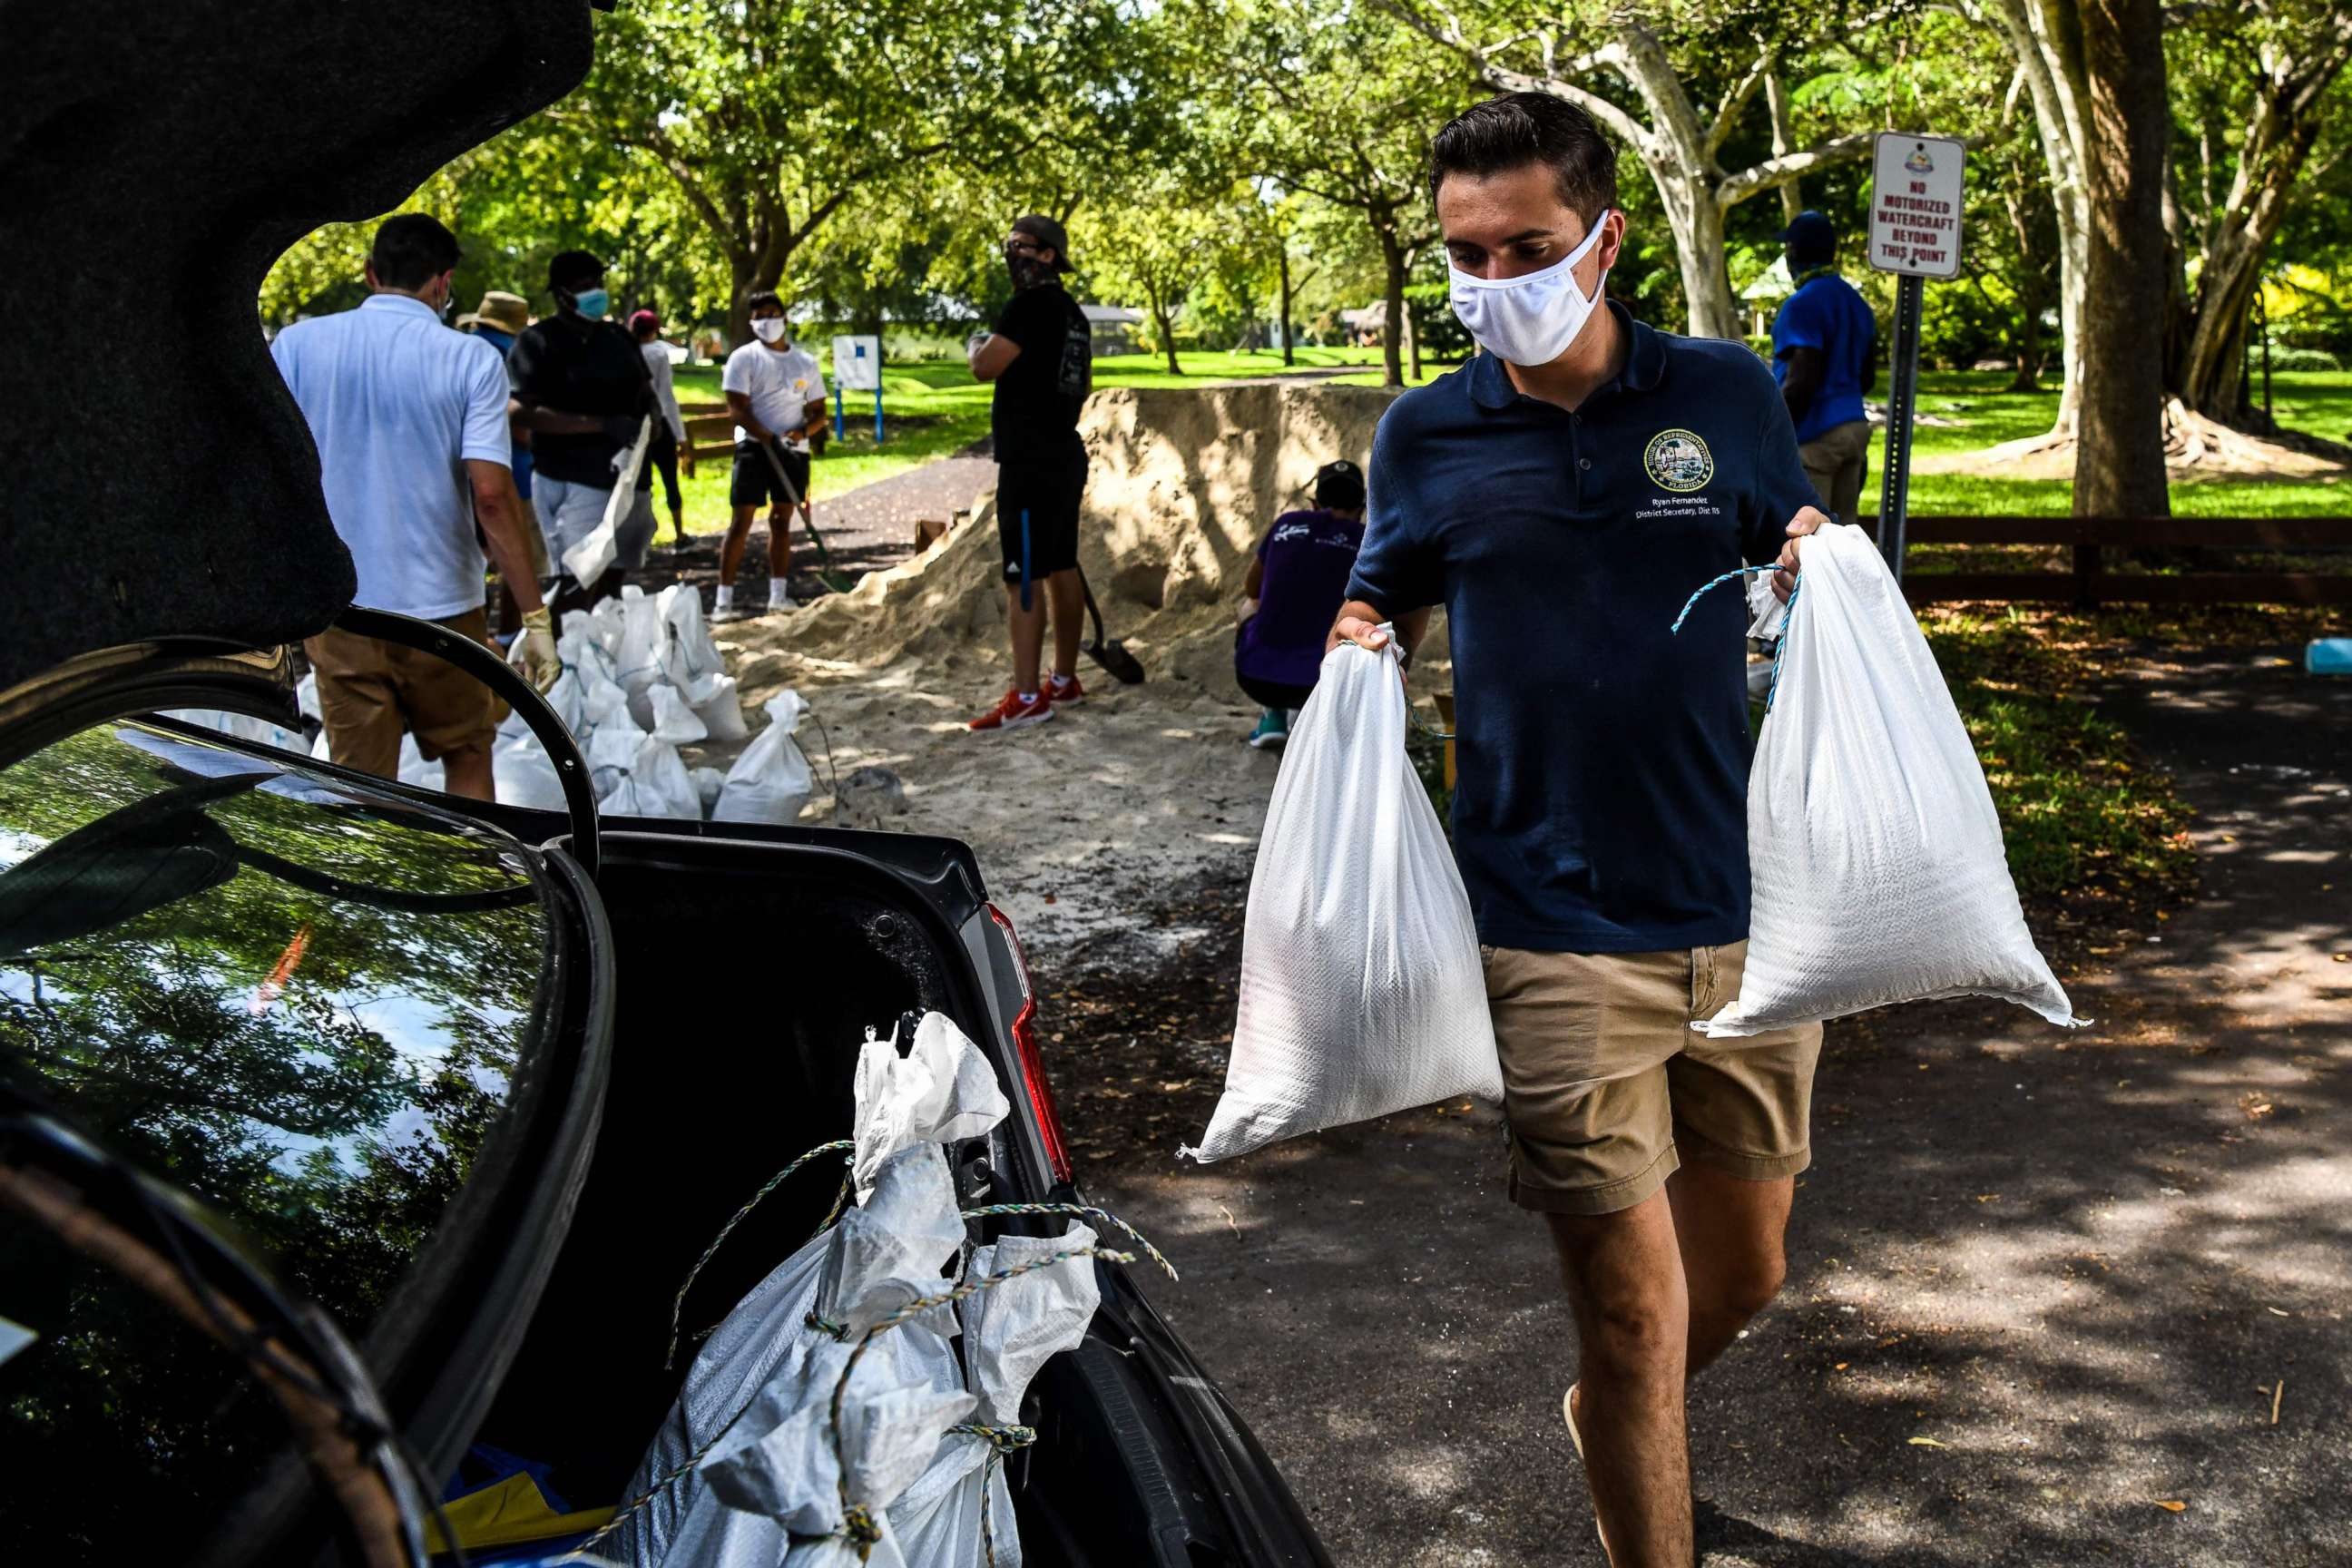 PHOTO: Legislative Assistant Ryan Fernandez, puts sand bags in a resident's car trunk in Palmetto Bay near Miami, on July 31, 2020, as Floridians prepare for Hurricane Isaias while a State of Emergency has been declared for 19 Counties.